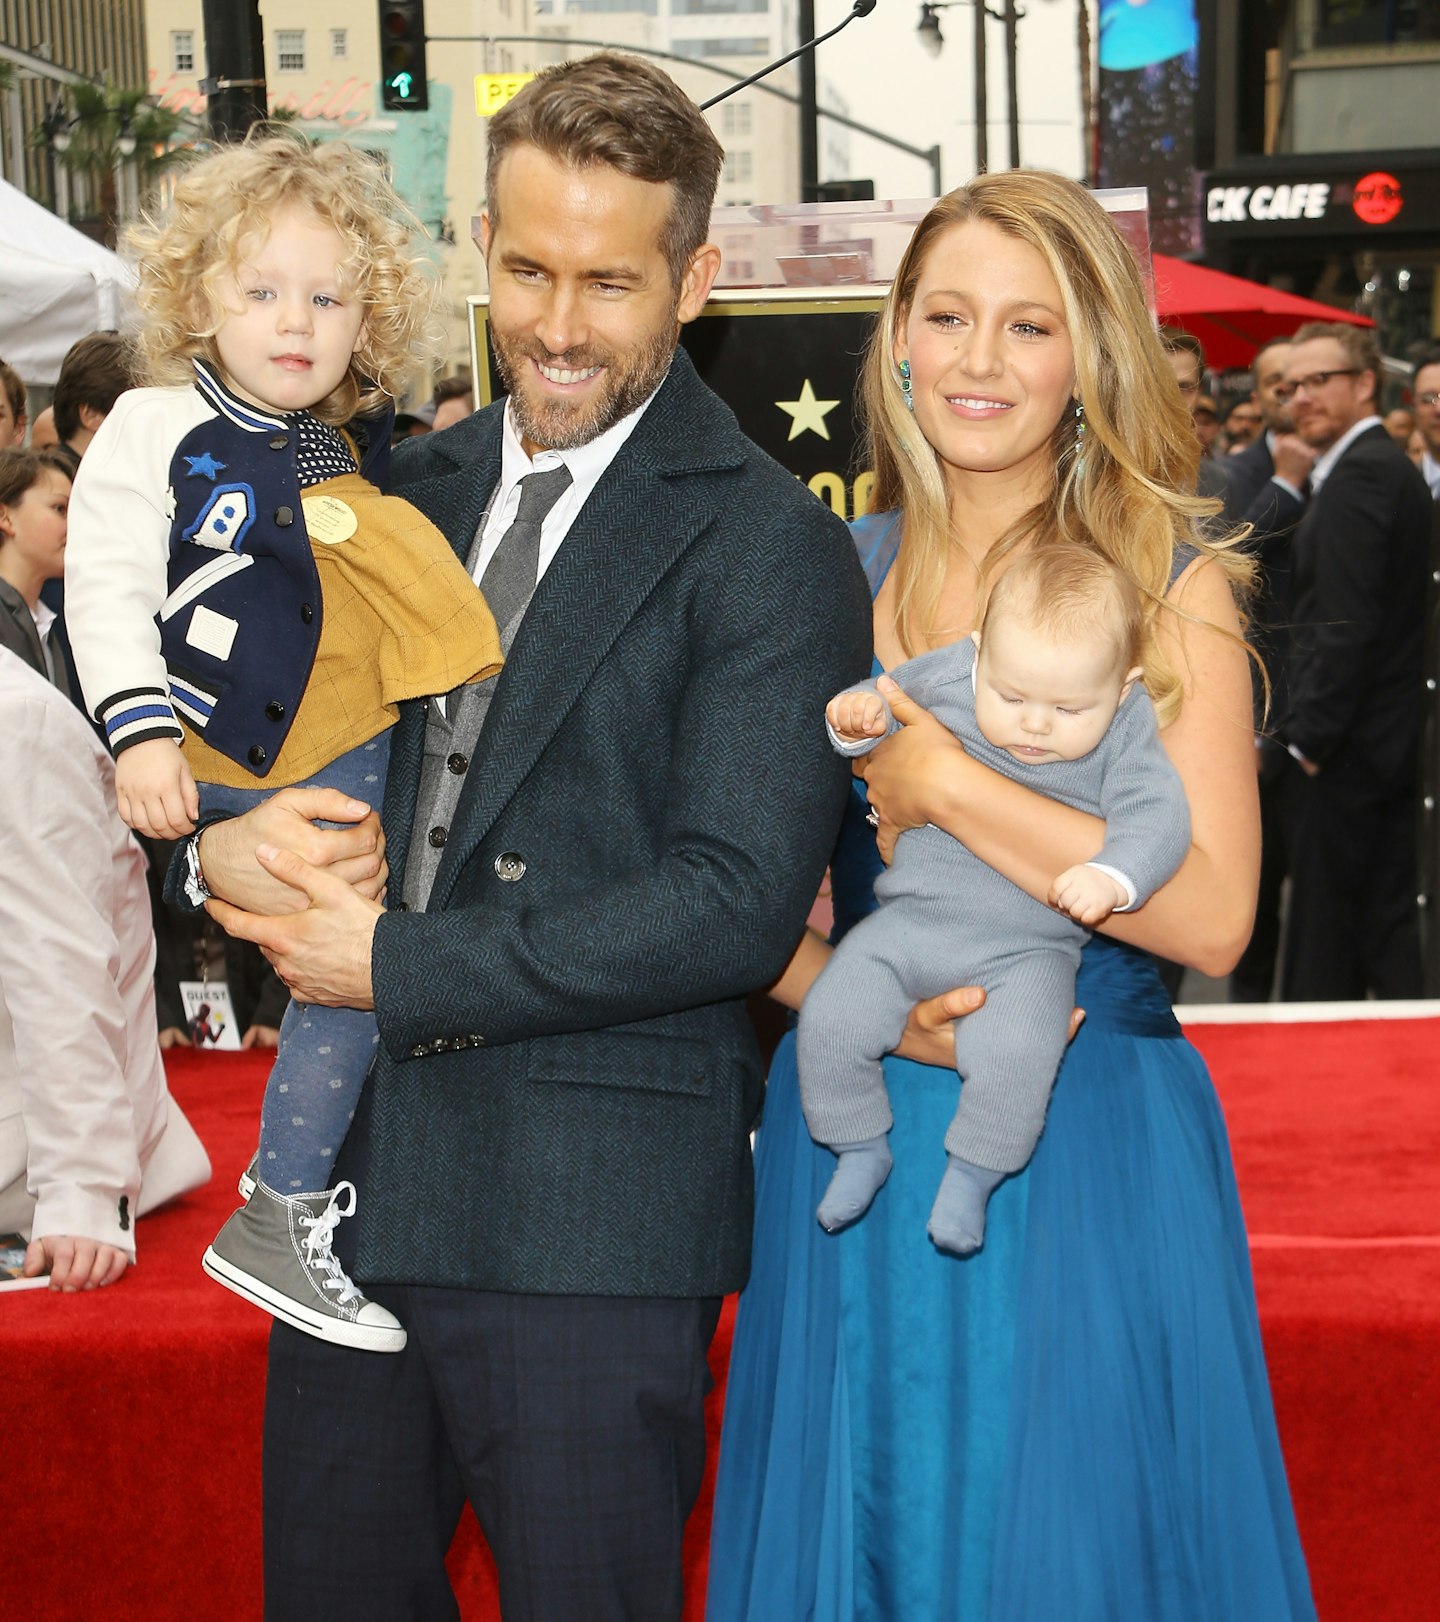 Ryan Reynolds (L) and Blake Lively with their daughters attend the ceremony honoring actor Ryan Reynolds with a Star on The Hollywood Walk of Fame held on December 15, 2016 in Hollywood, California.